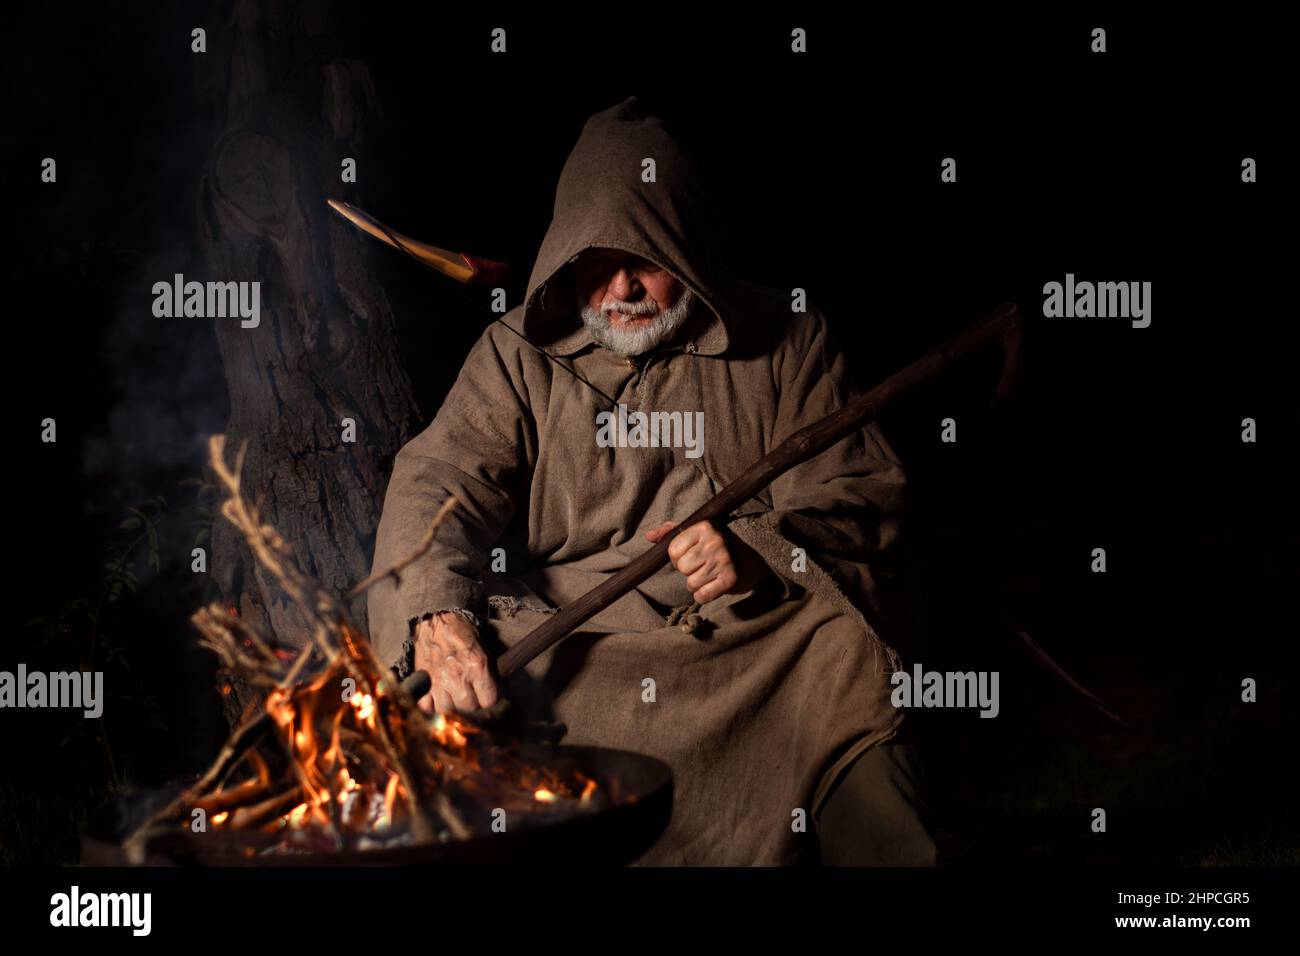 Old man in the middle ages with a bow and arrow Stock Photo